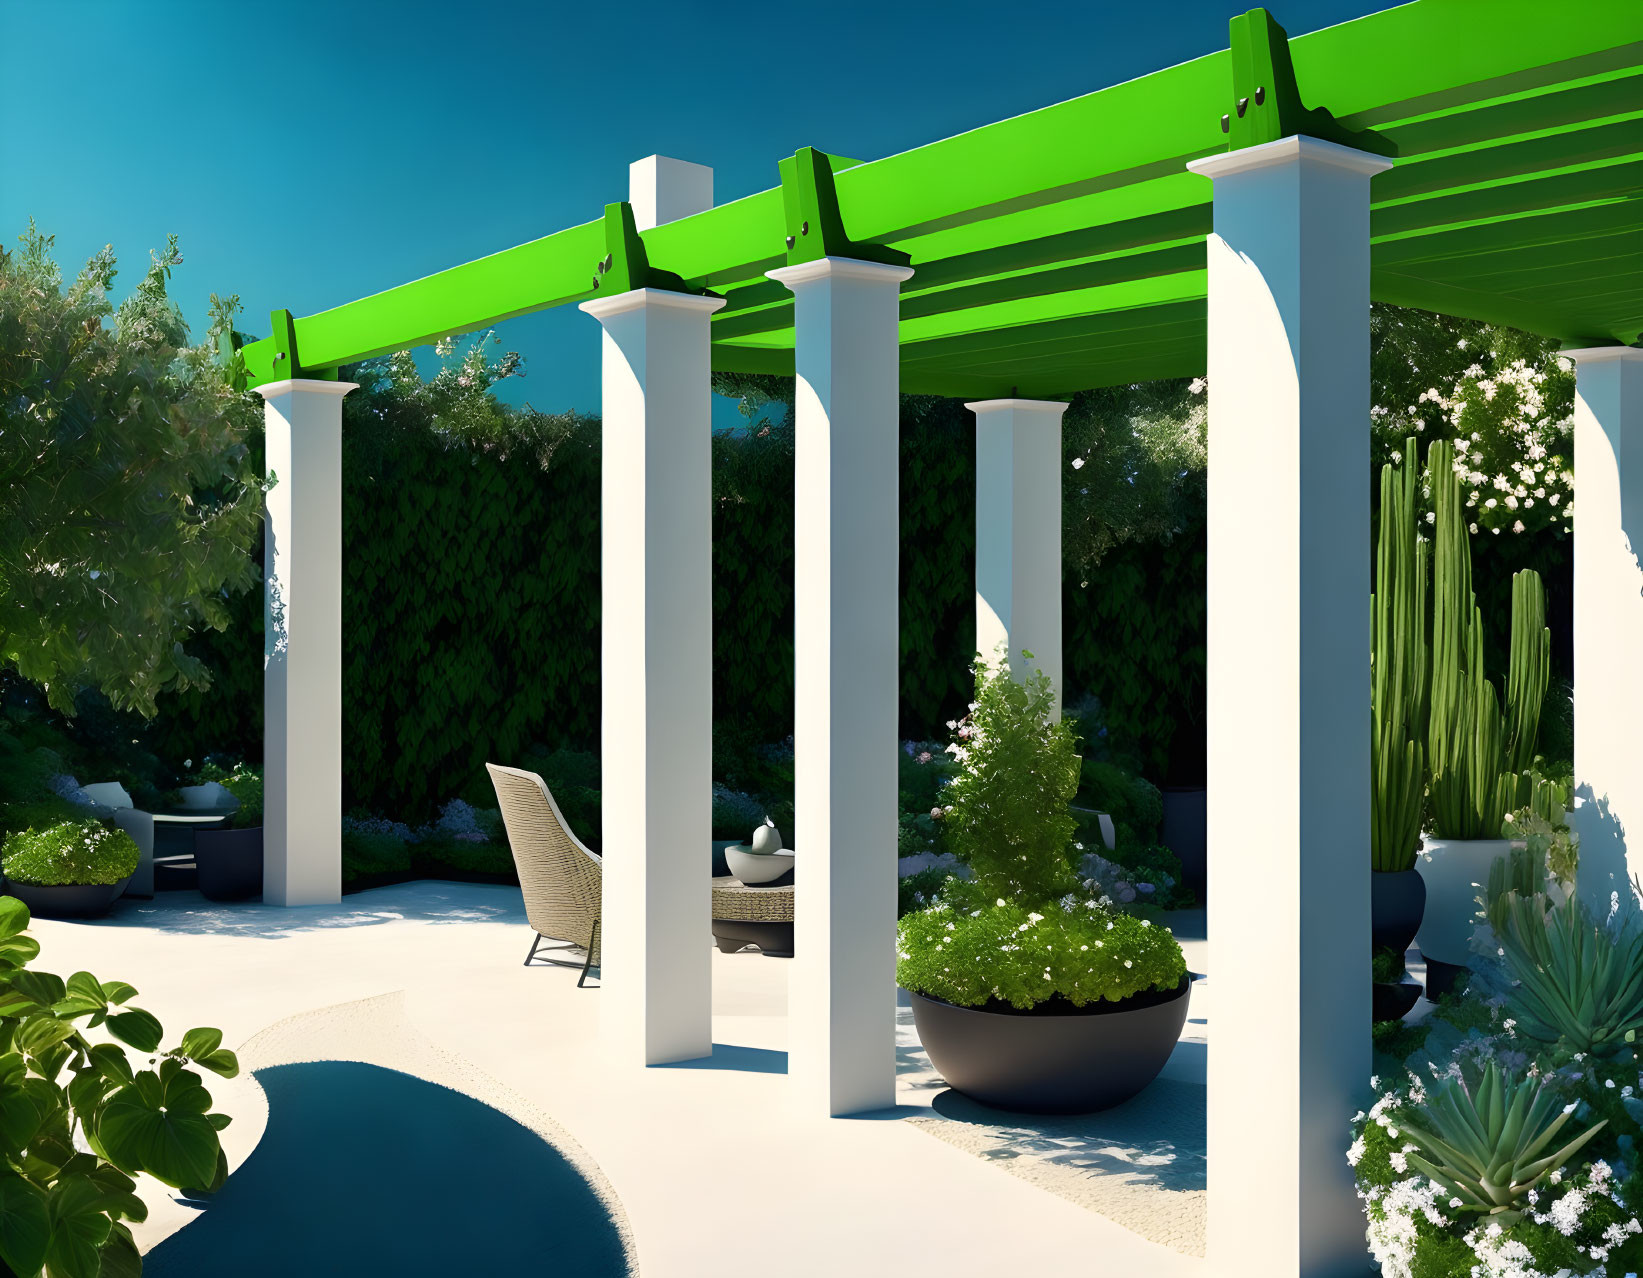 if a city pergola is painted green